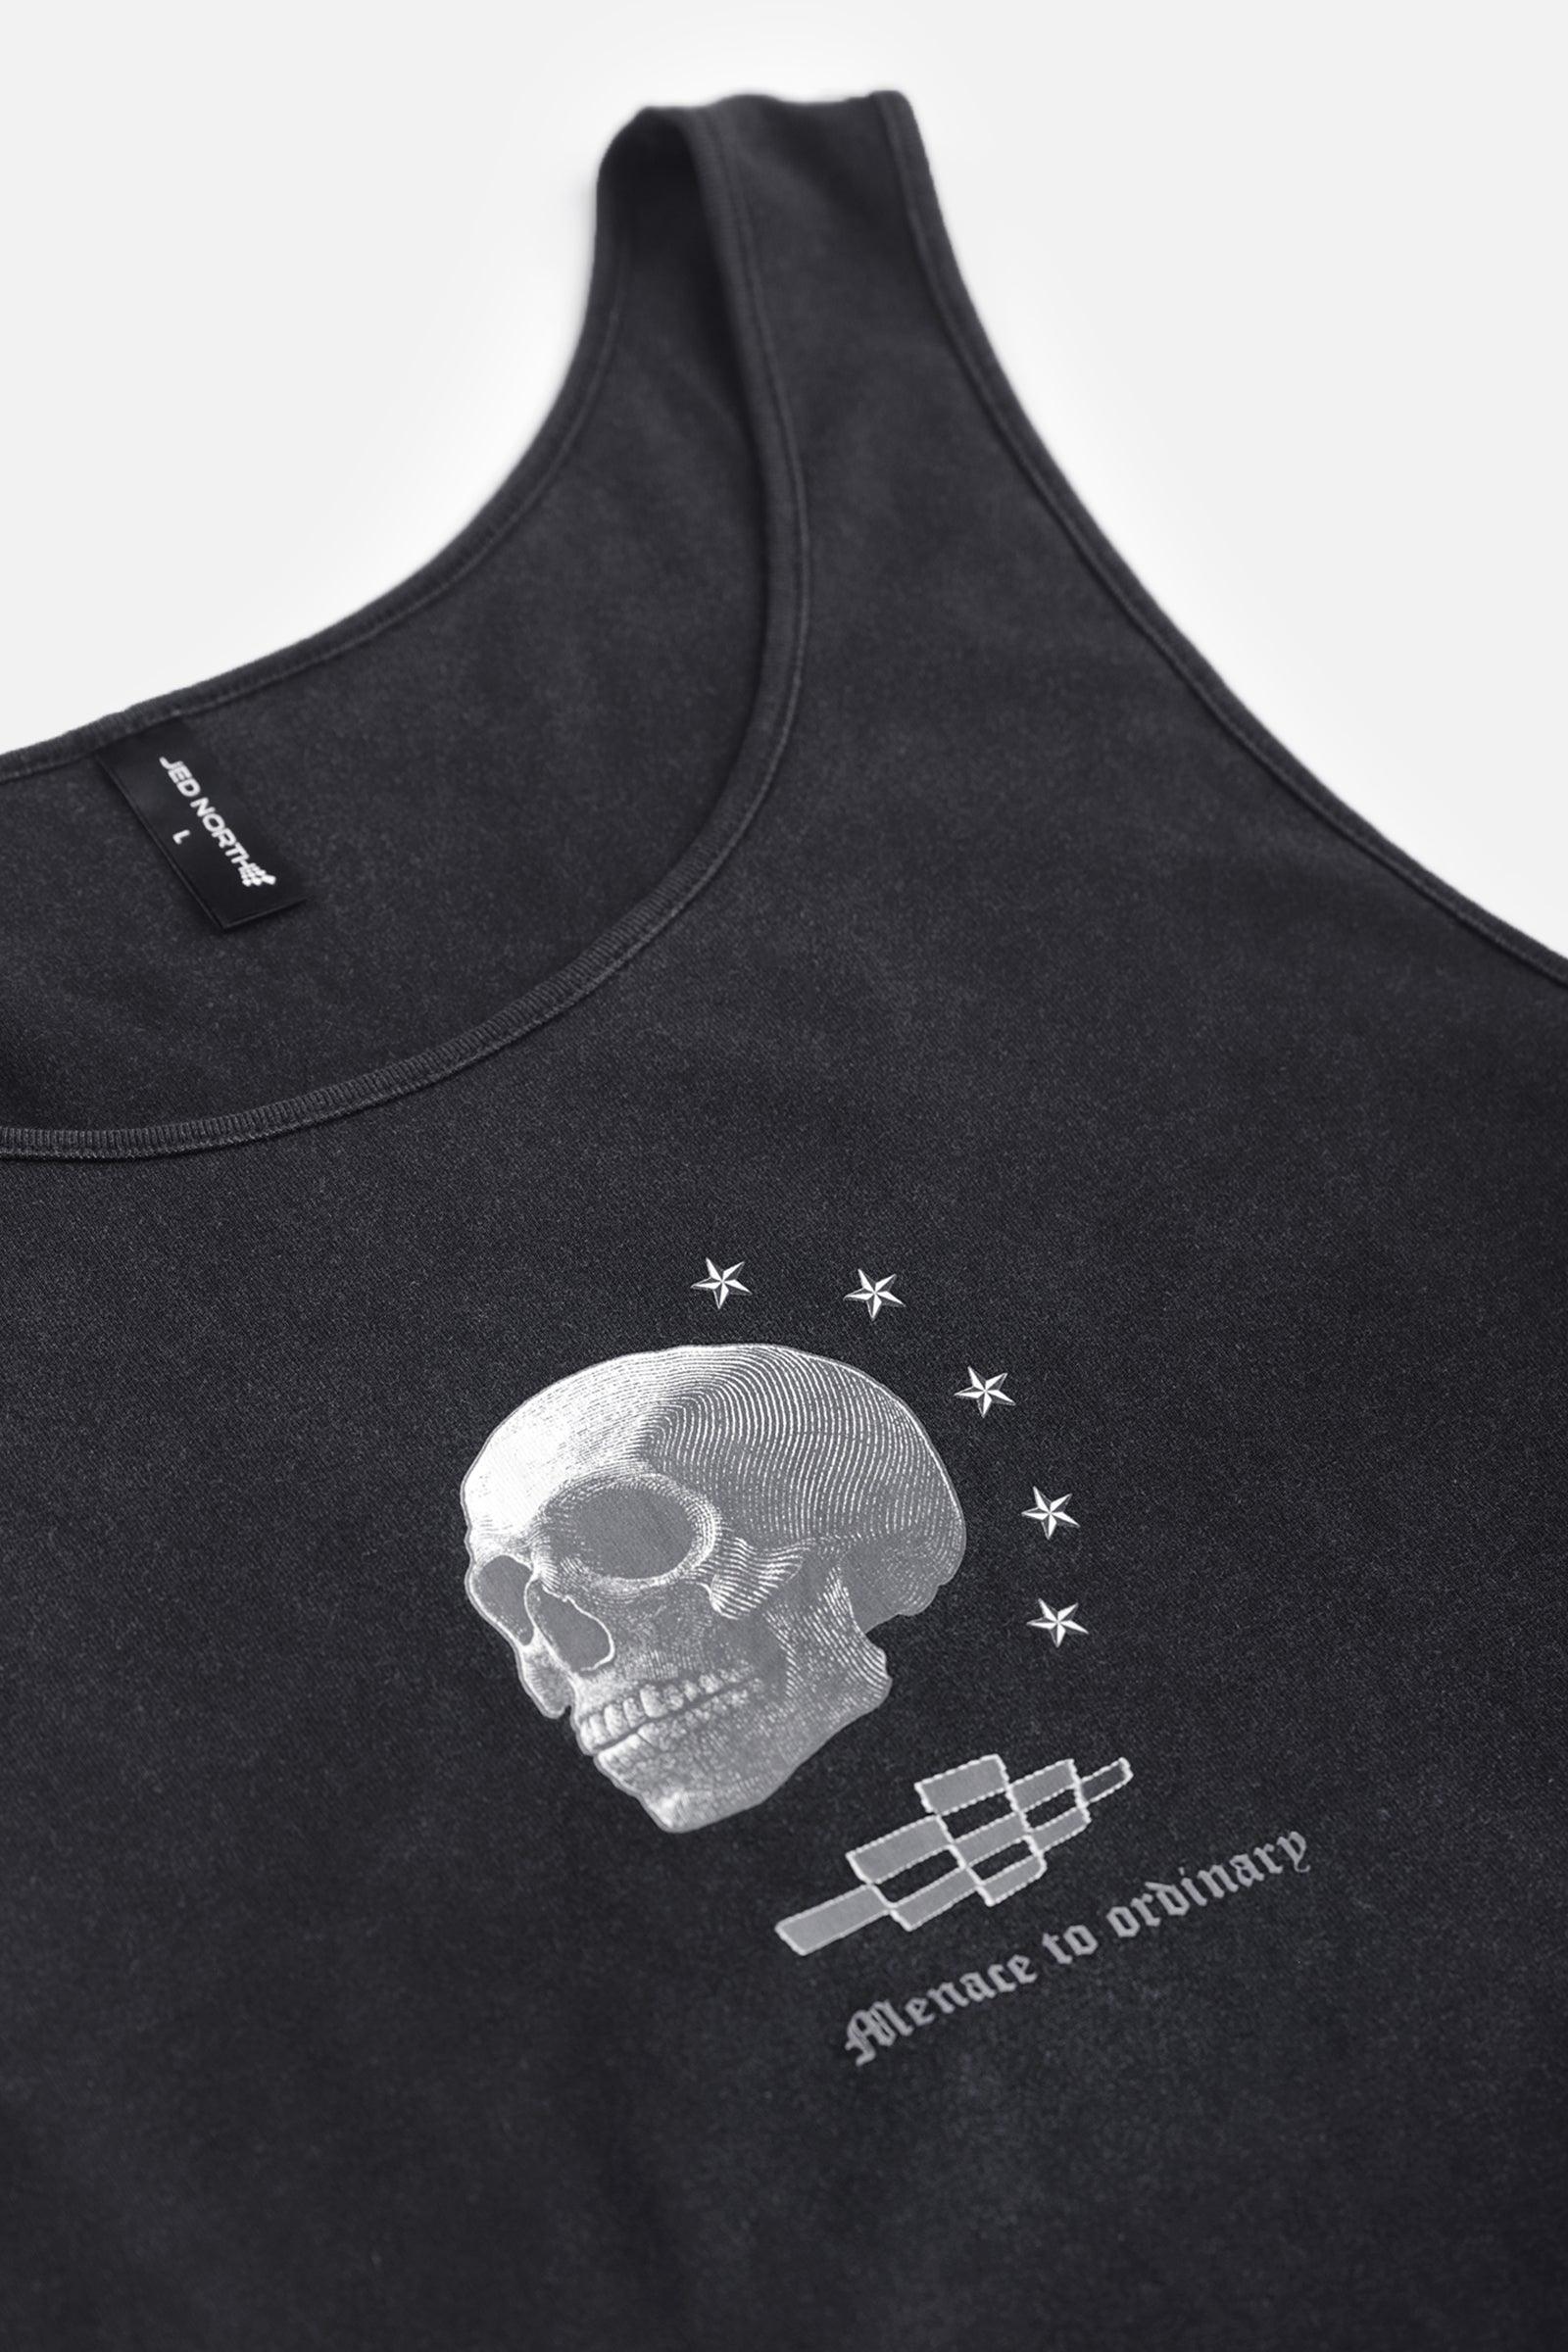 Heavy Duty Workout Tank Top - Washed Black Skull - Jed North Canada